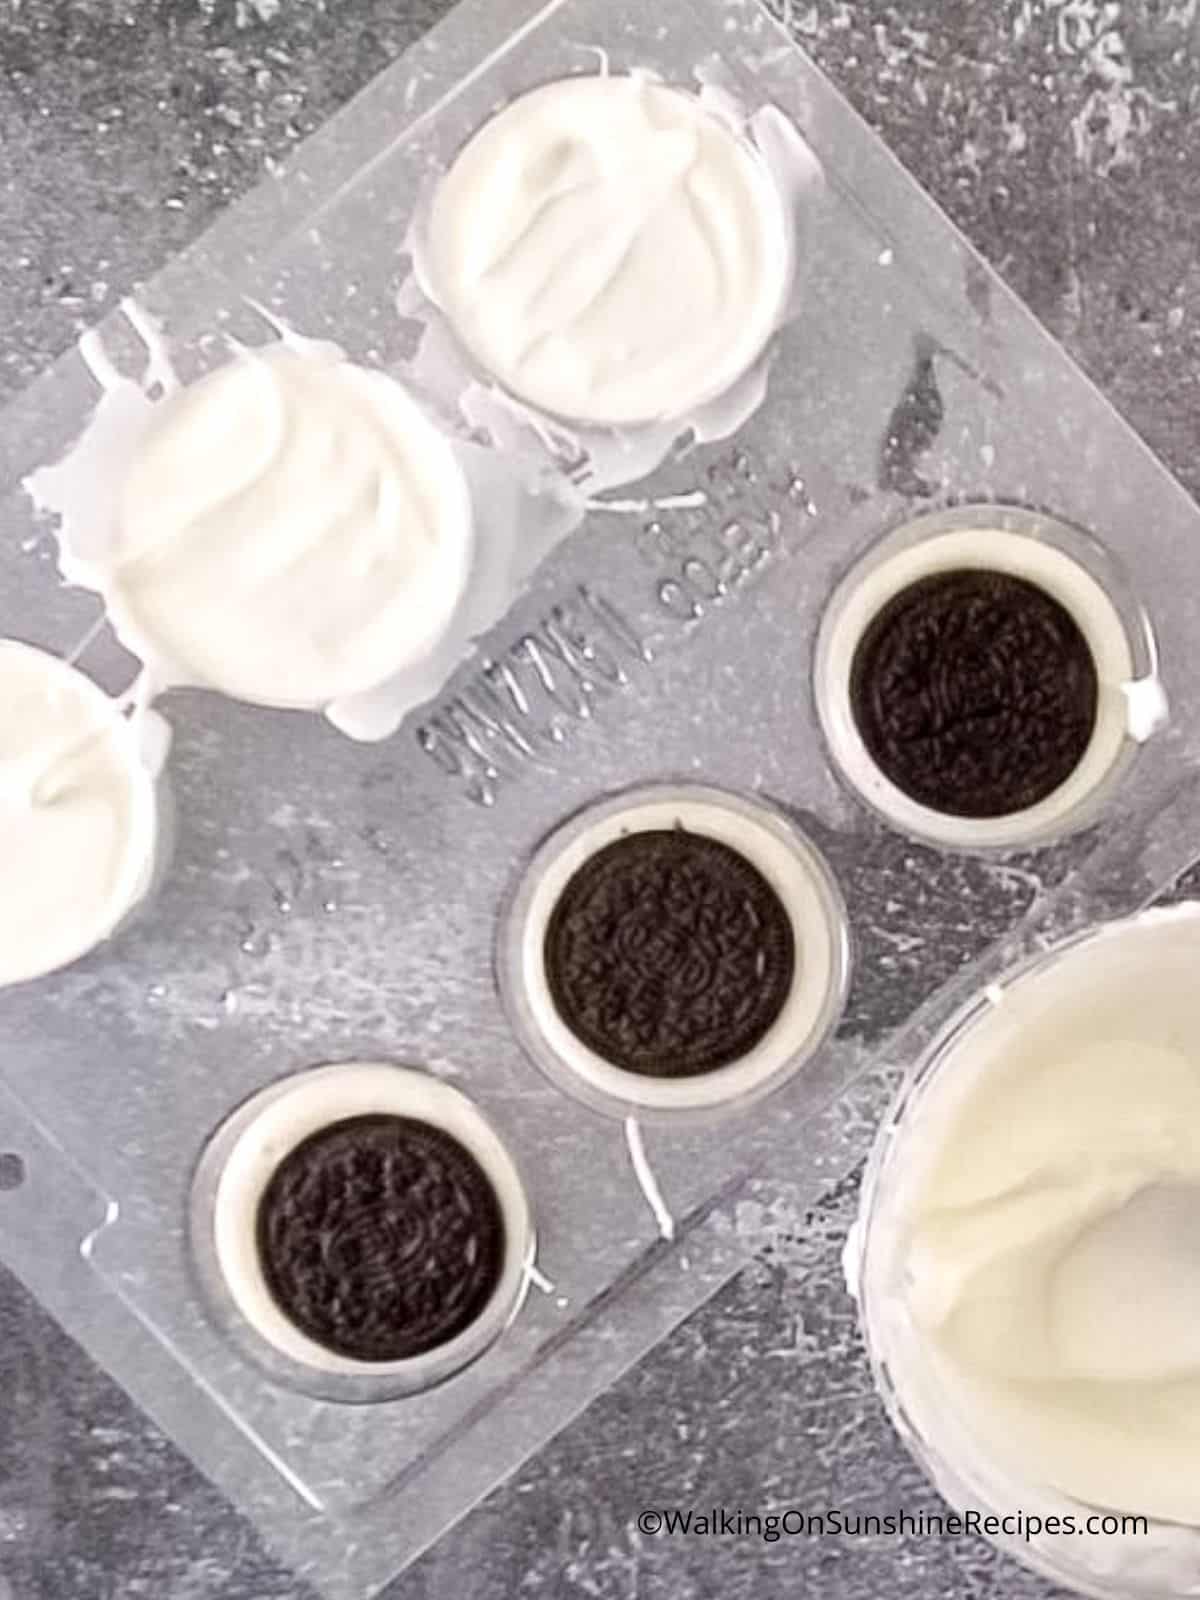 Oreo cookies in mold with melted white chocolate.